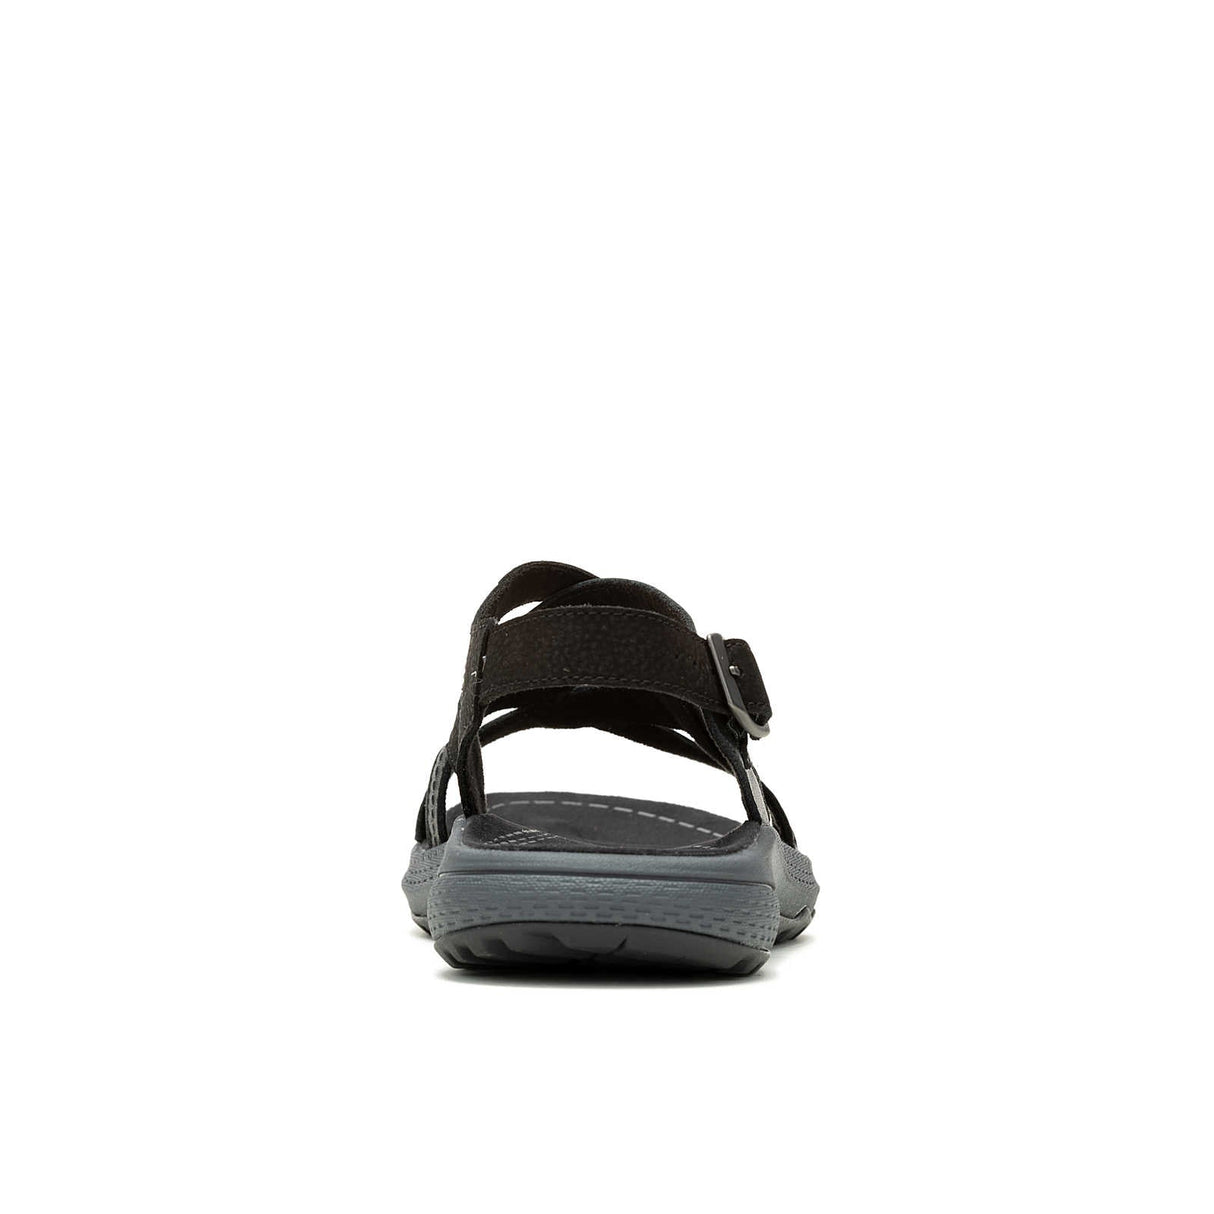 Merrell Women's Momentum Agave Sandals - A&M Clothing & Shoes